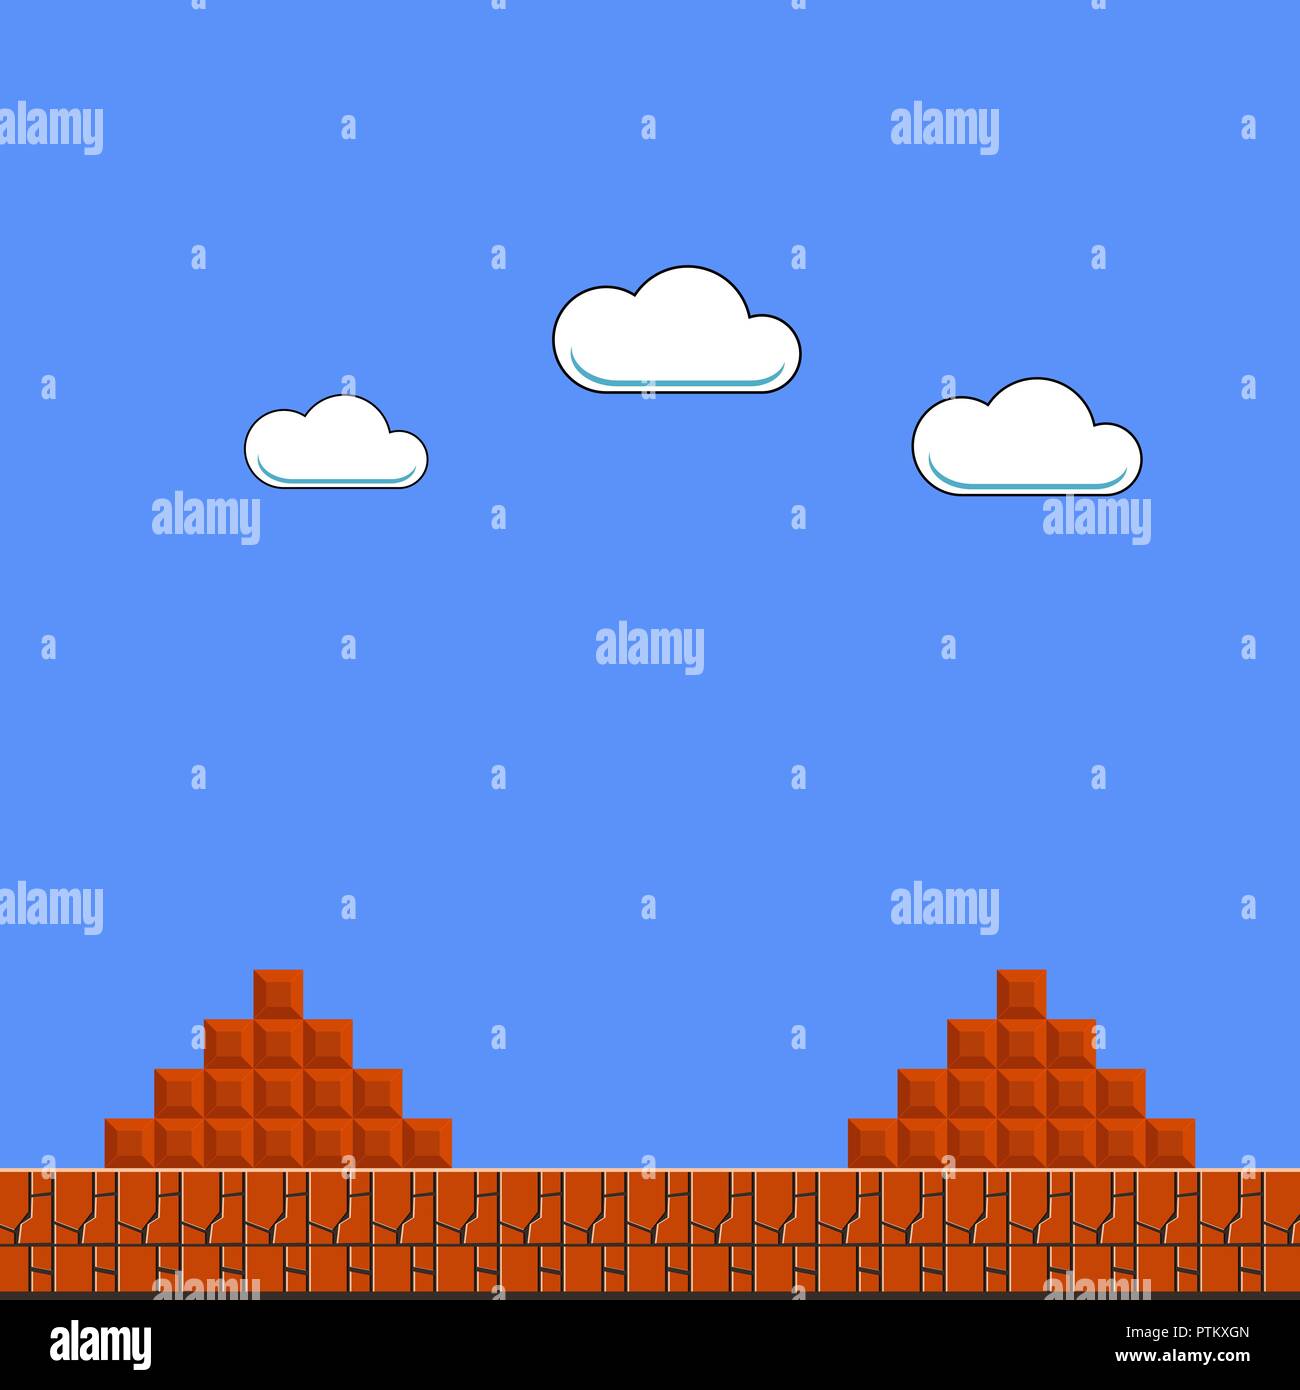 Old Game Background. Classic Arcade Design with Clouds and Brick. Stock Vector